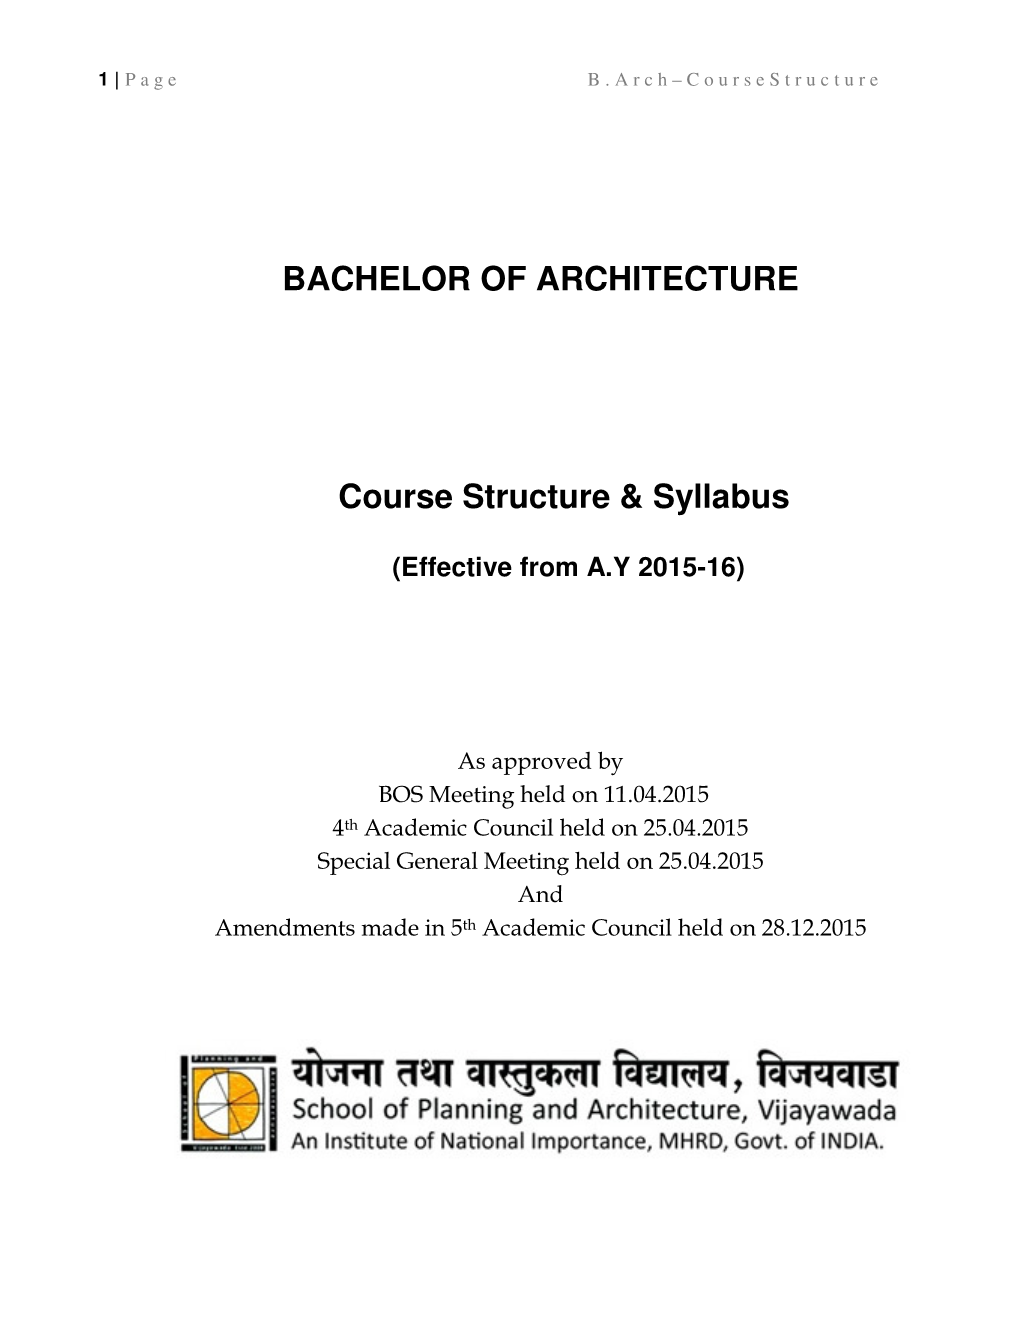 B.Arch – Course Structure